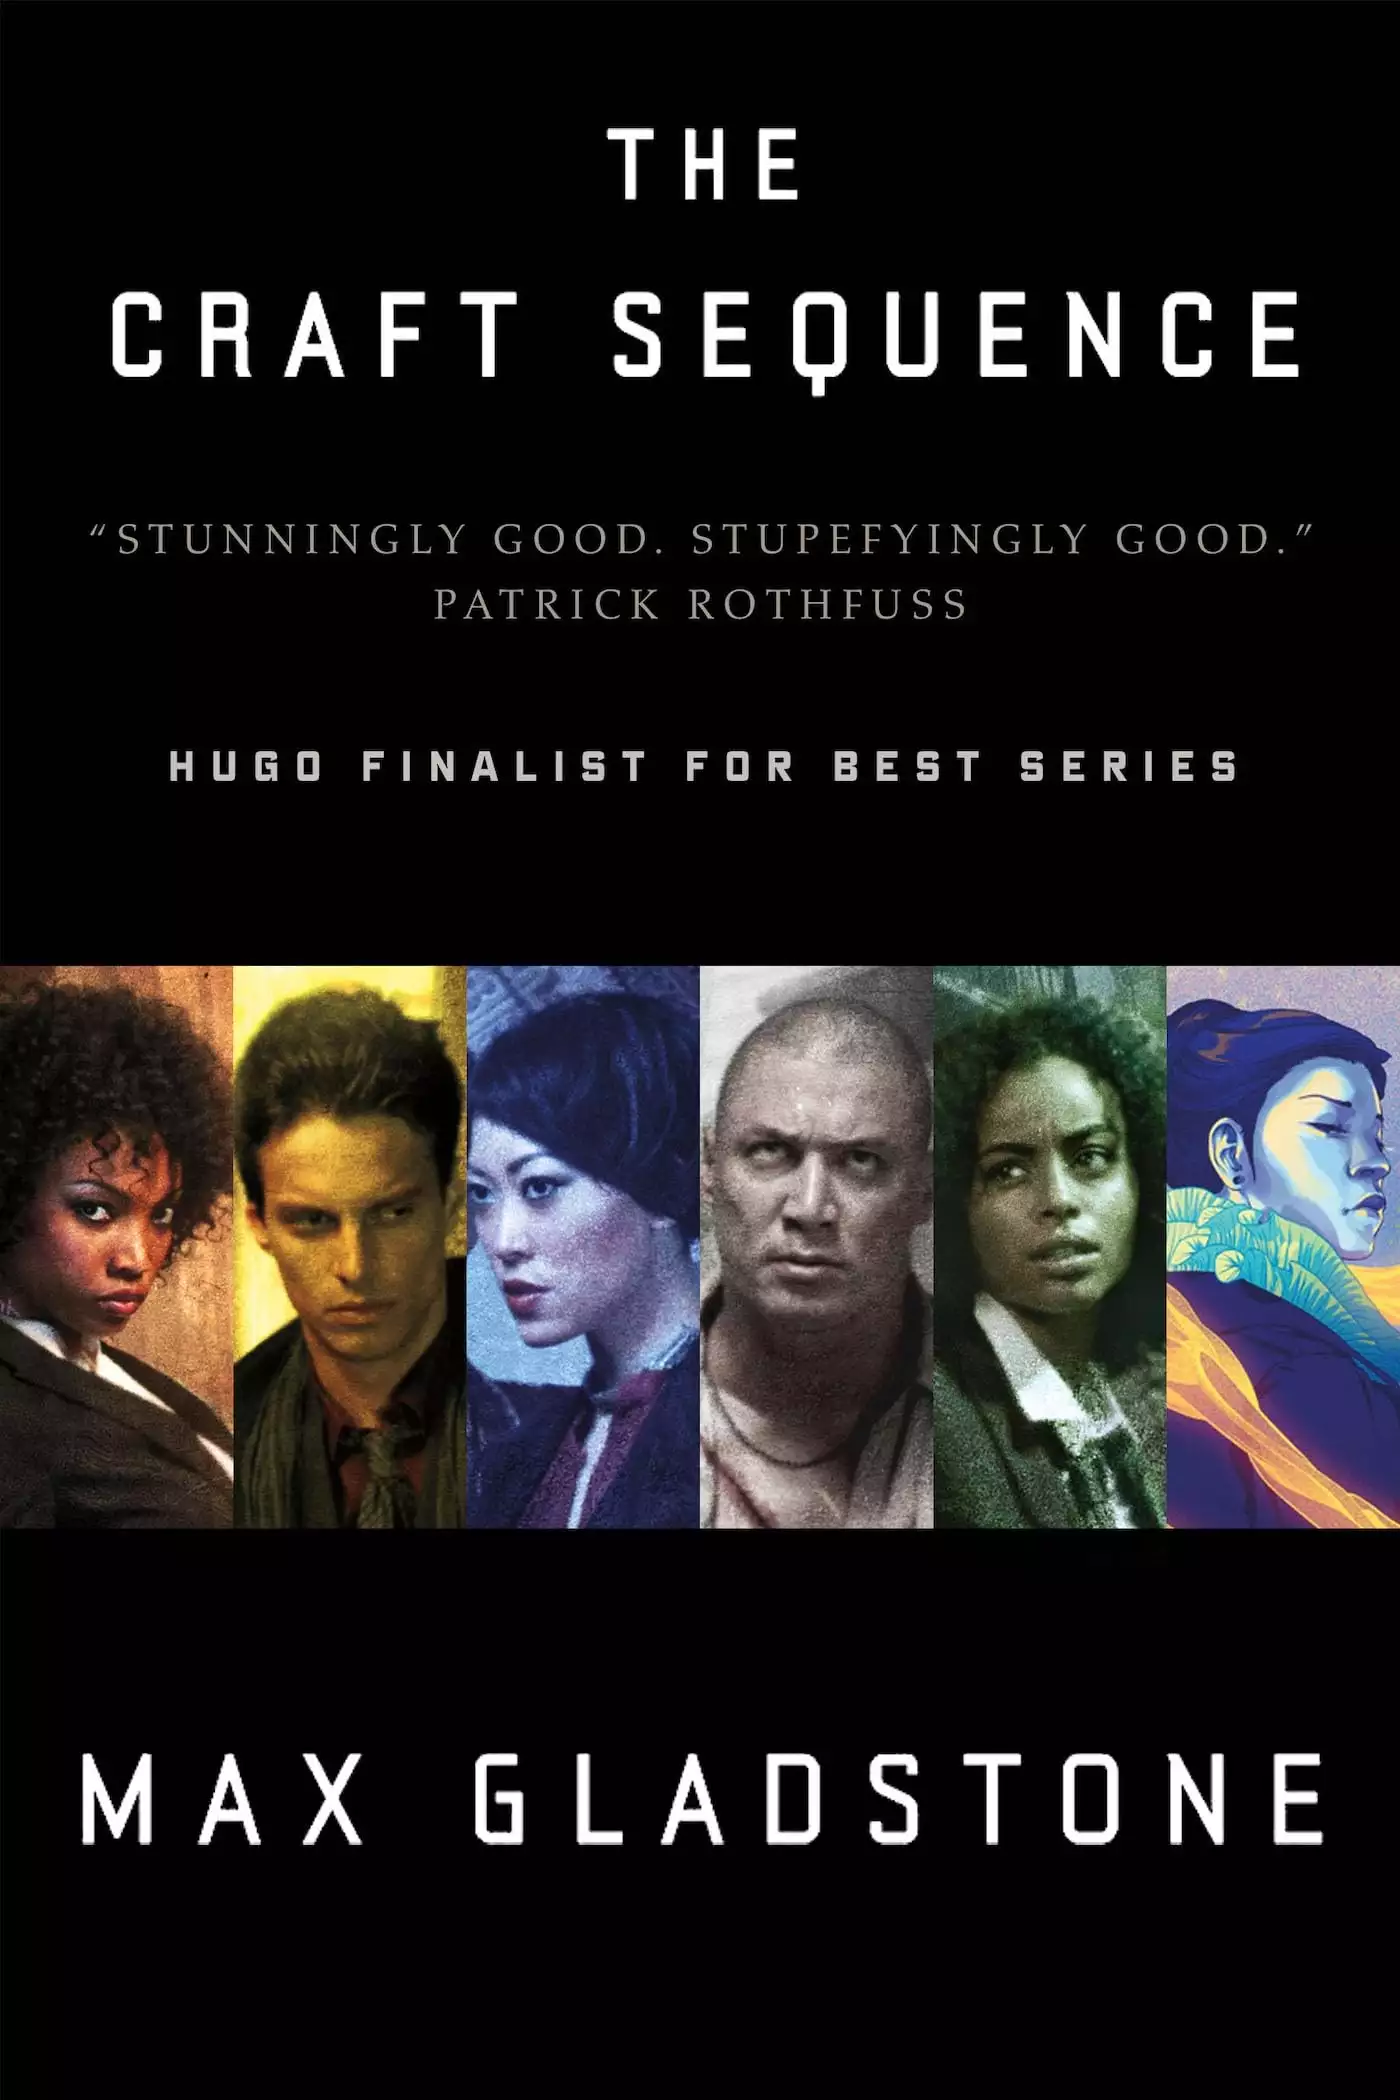 The Craft Sequence